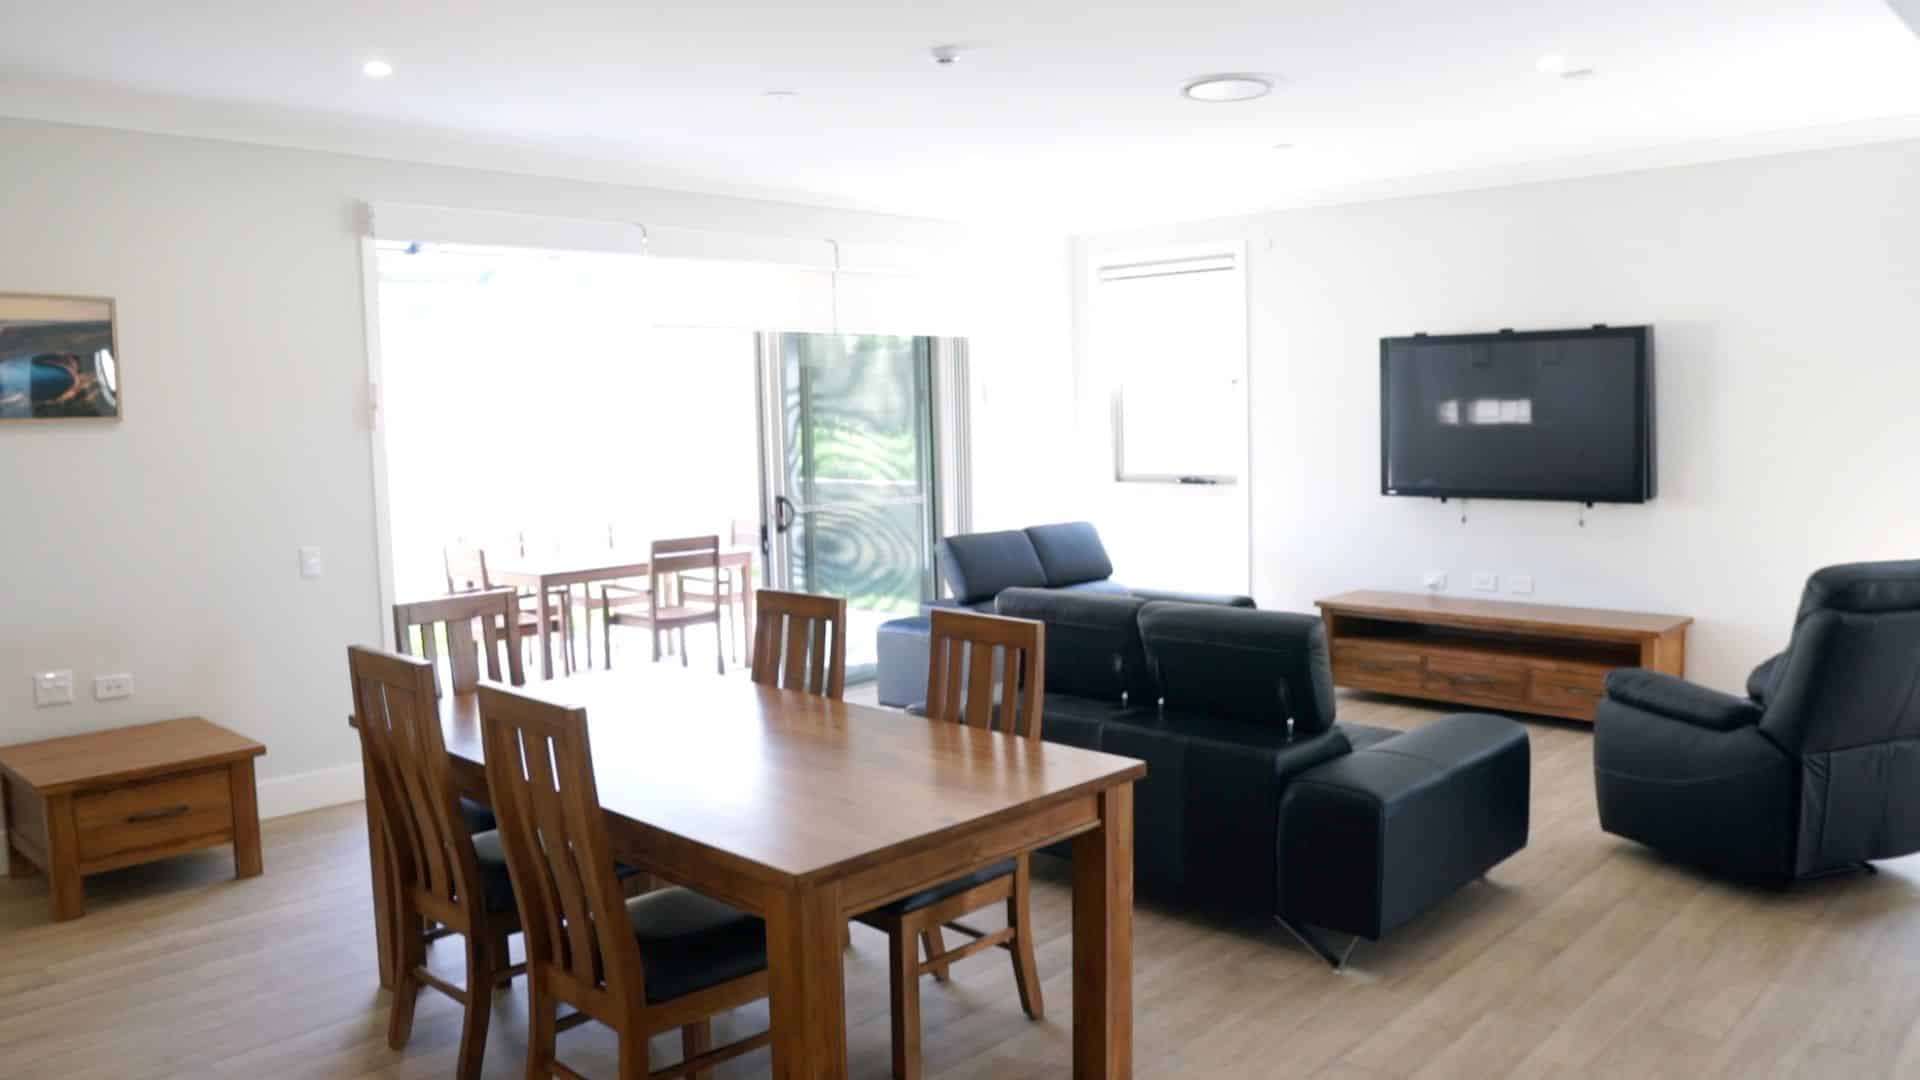 Living room at the Wyong 1 property featuring a tv with three couches, and dining table and glass sliding door out to a balcony